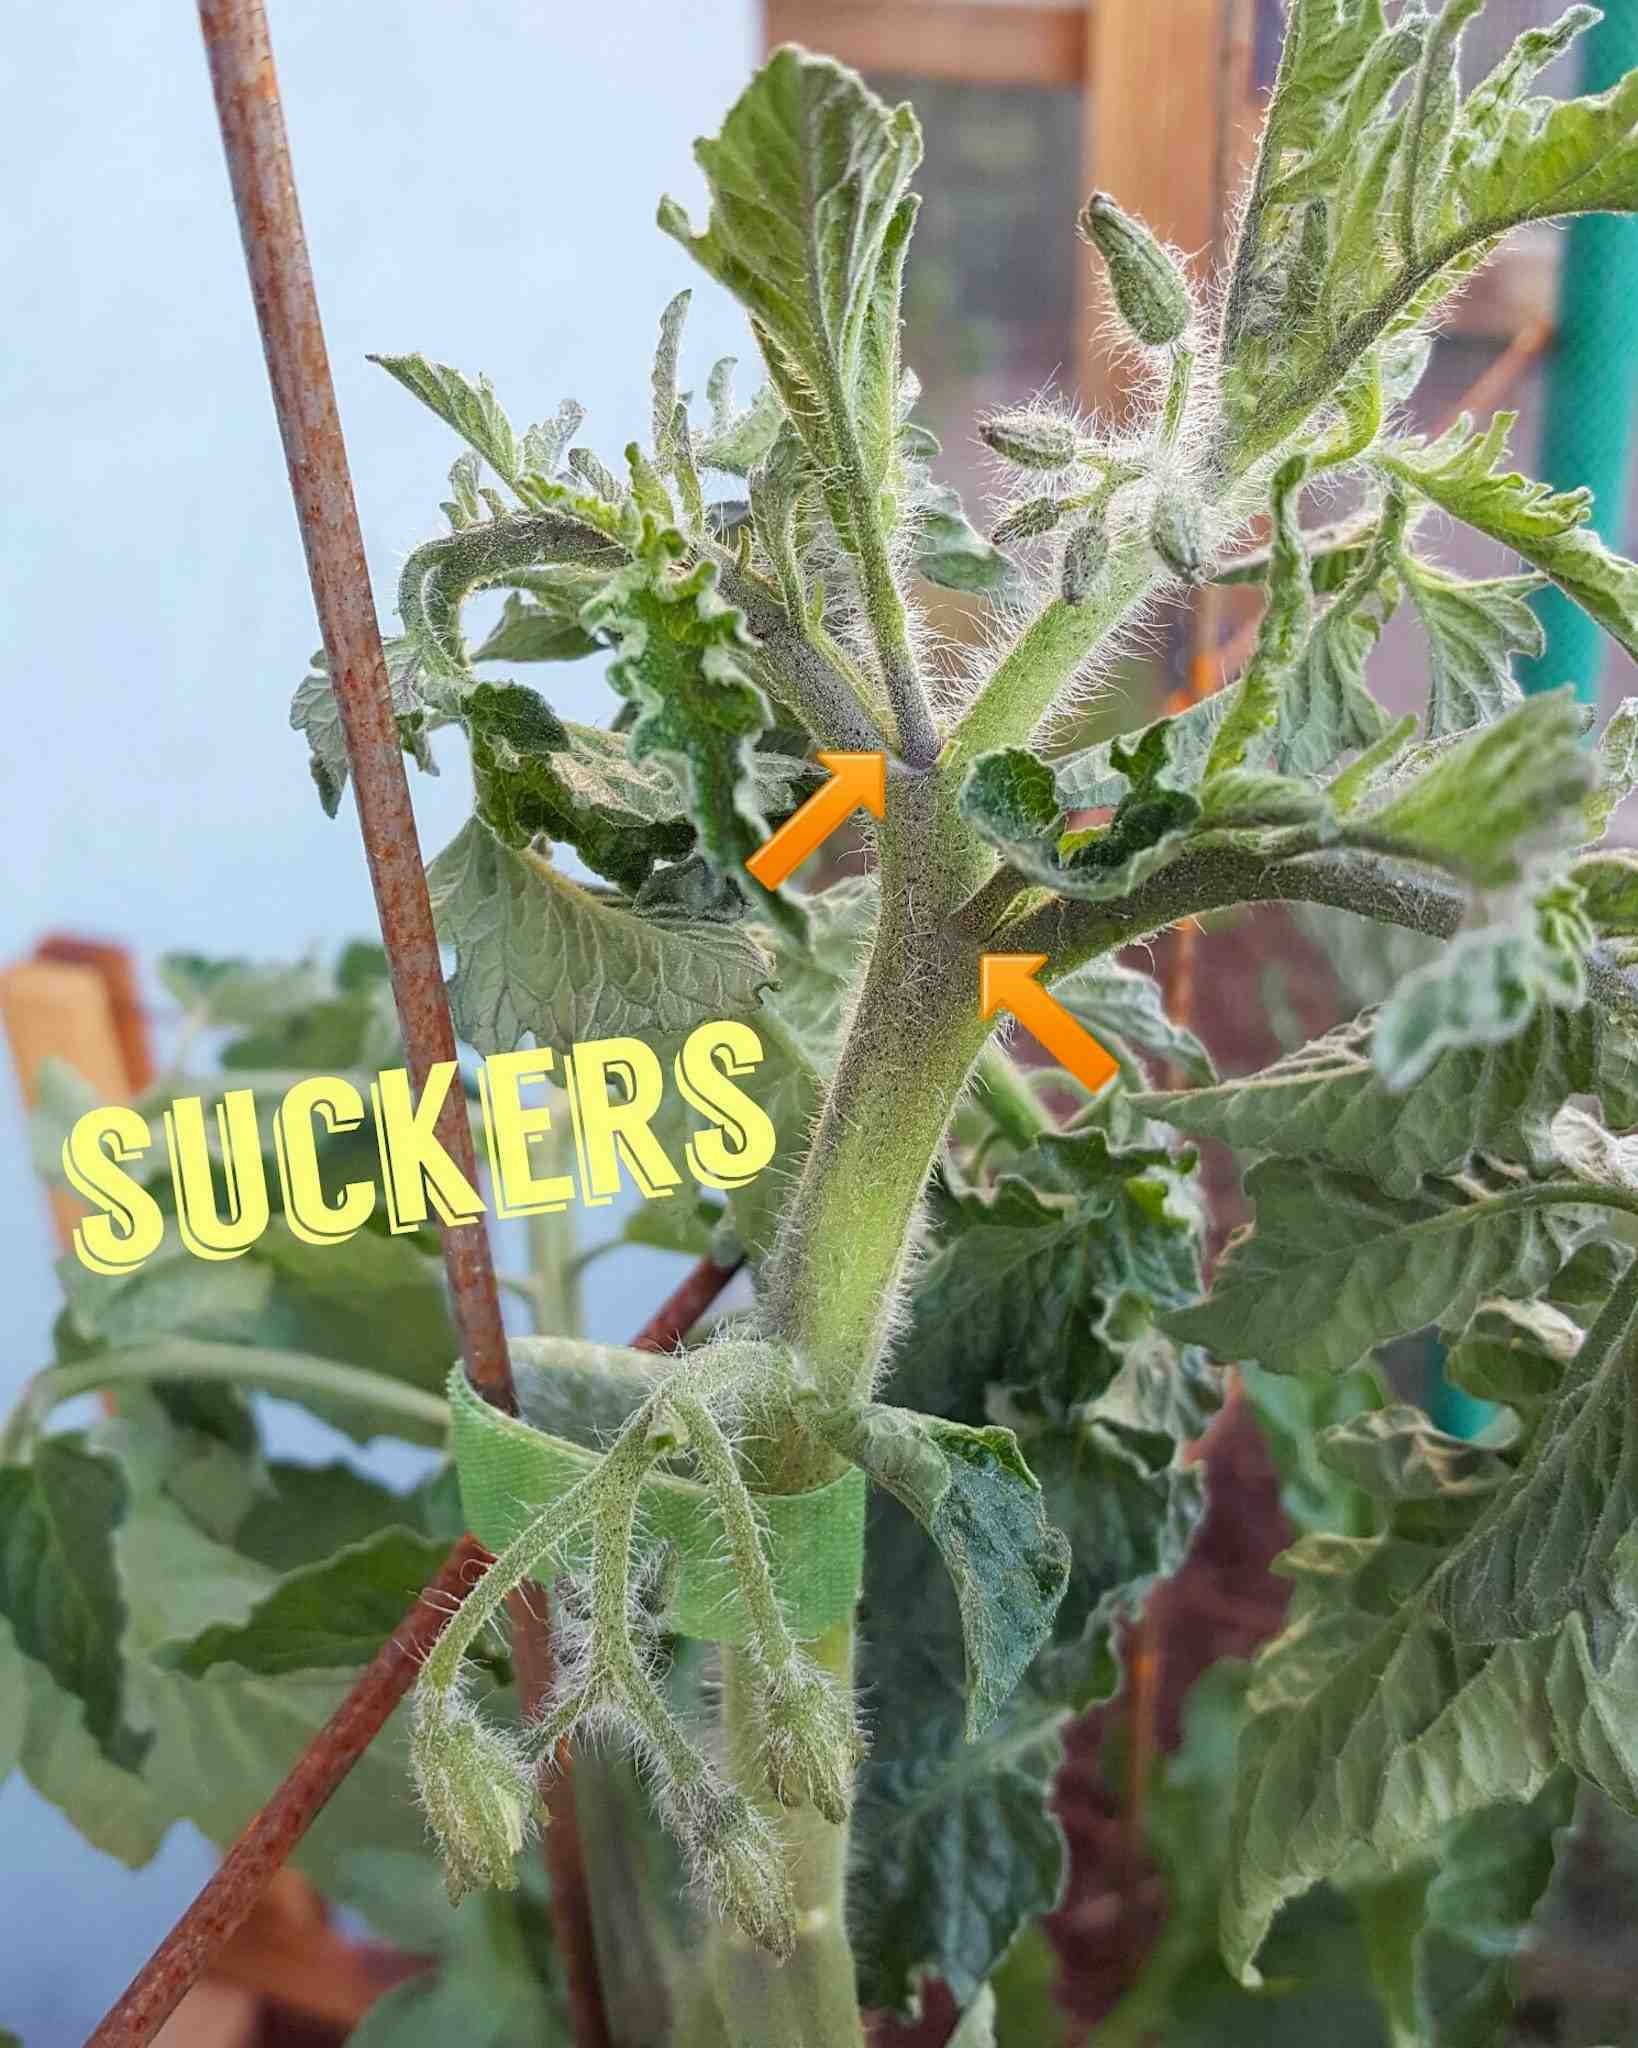 A close up image of the top of a tomato plant. The sucker branches off of the leader are shown by two arrows pointing to each of the sucker branches which are forming at the crook of the main stem and leaf branching. The word "suckers" as been photo shopped onto the image to illustrate the point further. When young, suckers almost look like baby tomato plants growing off of the main tomato plant.